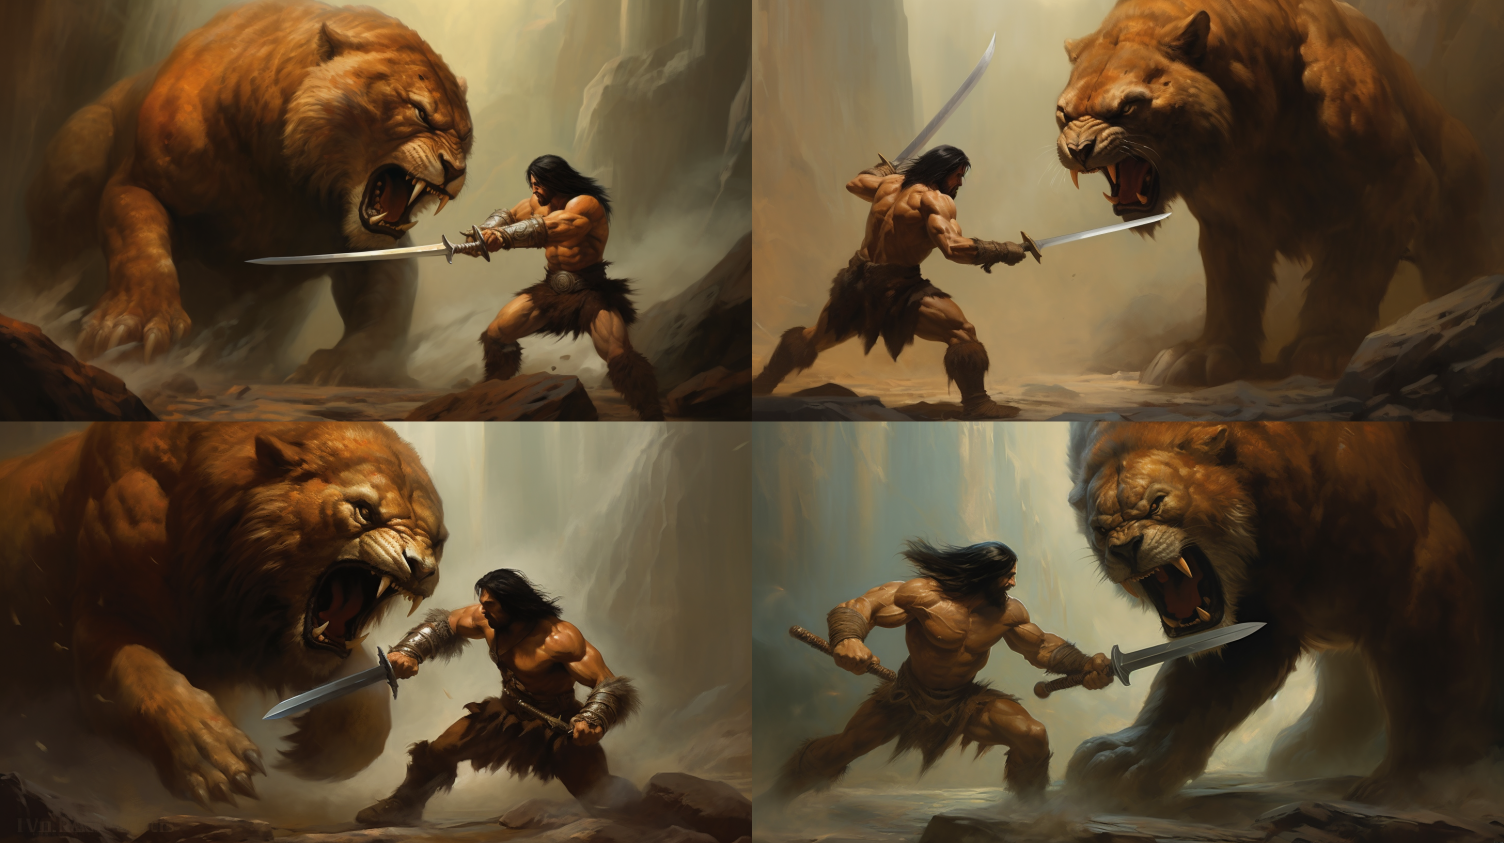 nakomoto_conan_the_barbarian_fight_with_Saber-toothed_tiger_in_683c7bbf-9a6e-4d65-845b-e09549e70669.png